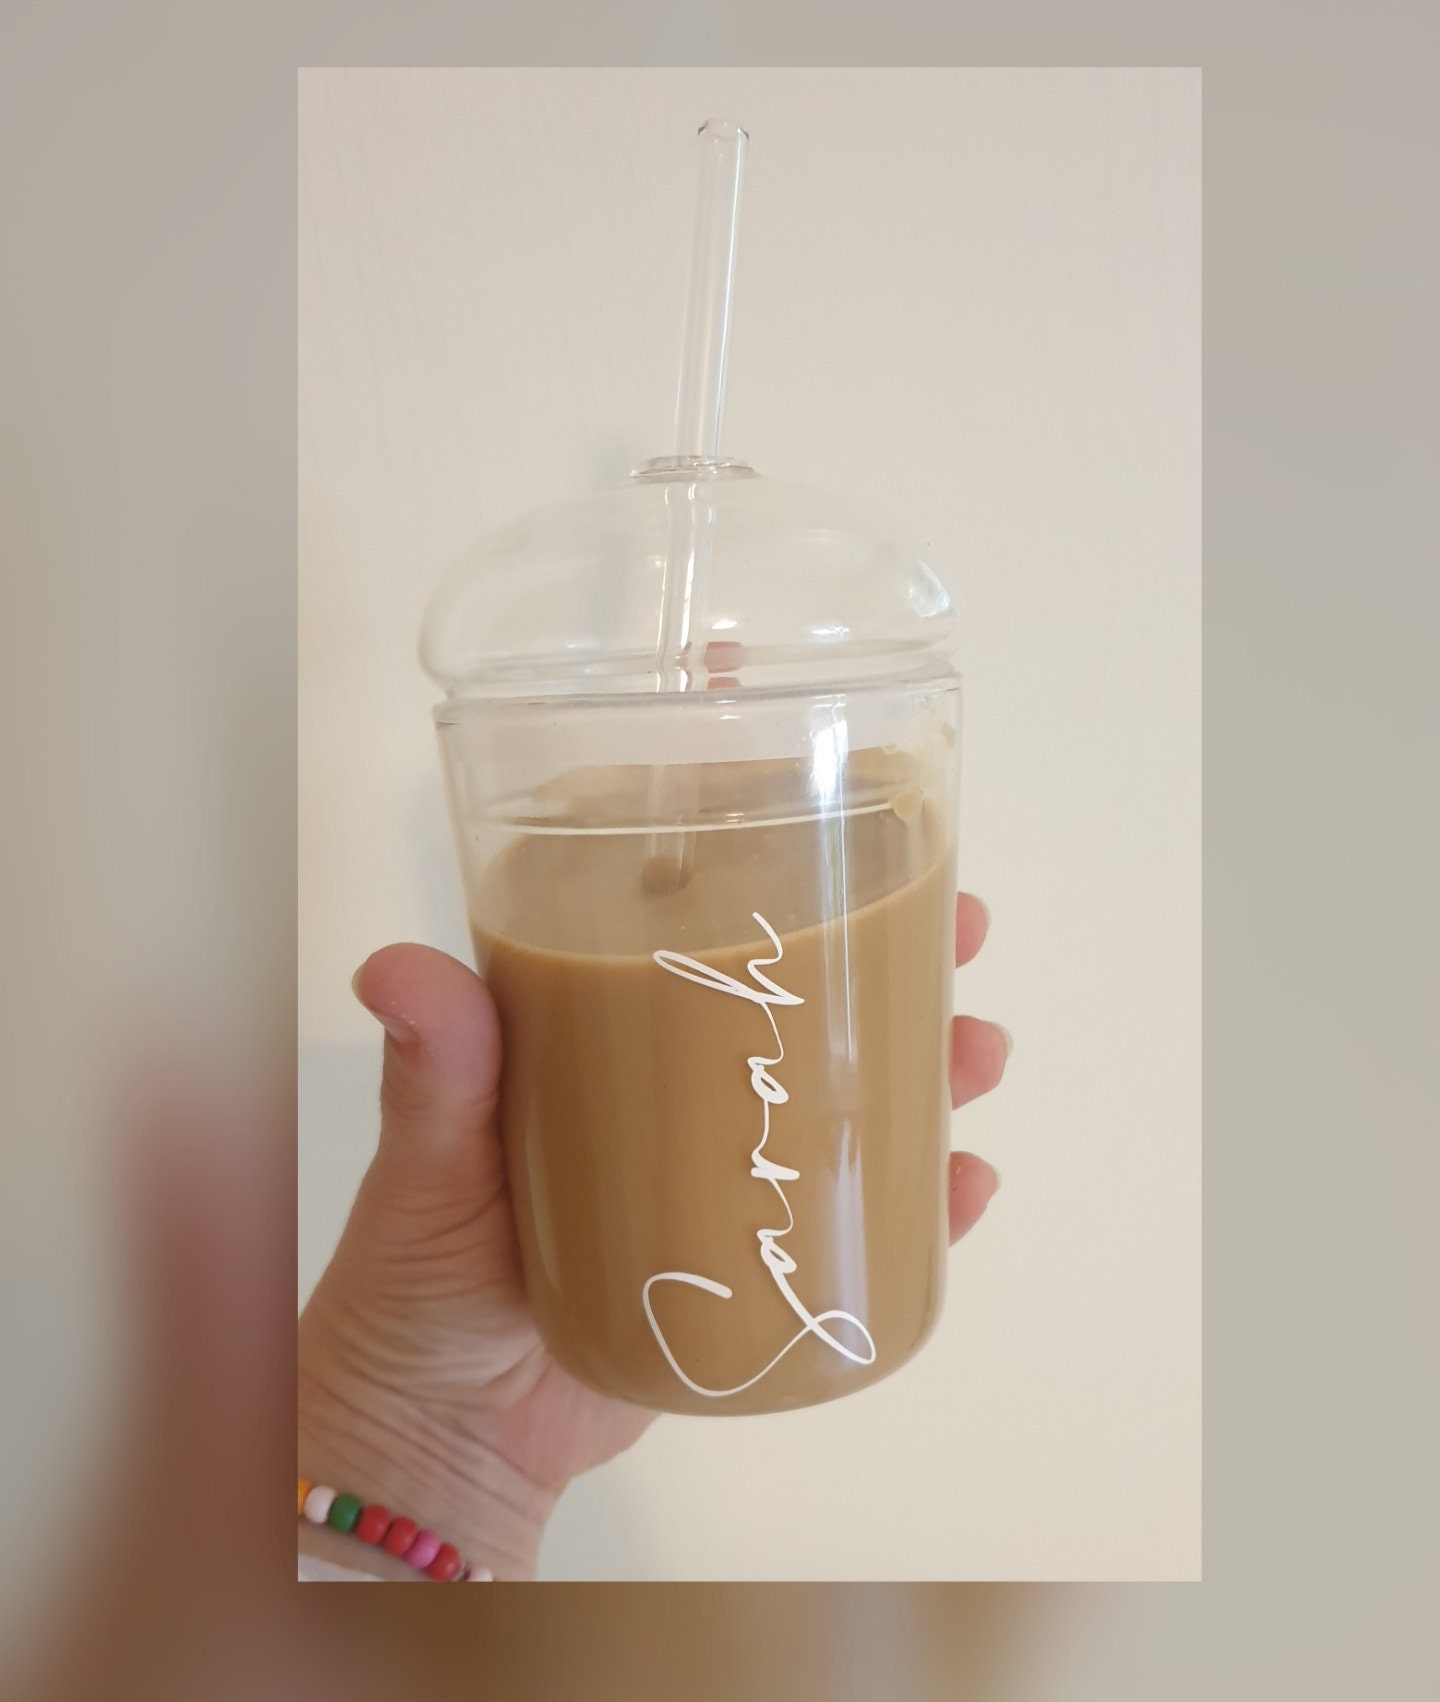 Qancesd Glass Cup with Lid and Straw, 16oz Iced Coffee Cups with Lids,  Glass Tumbler with Dome Lid, …See more Qancesd Glass Cup with Lid and  Straw